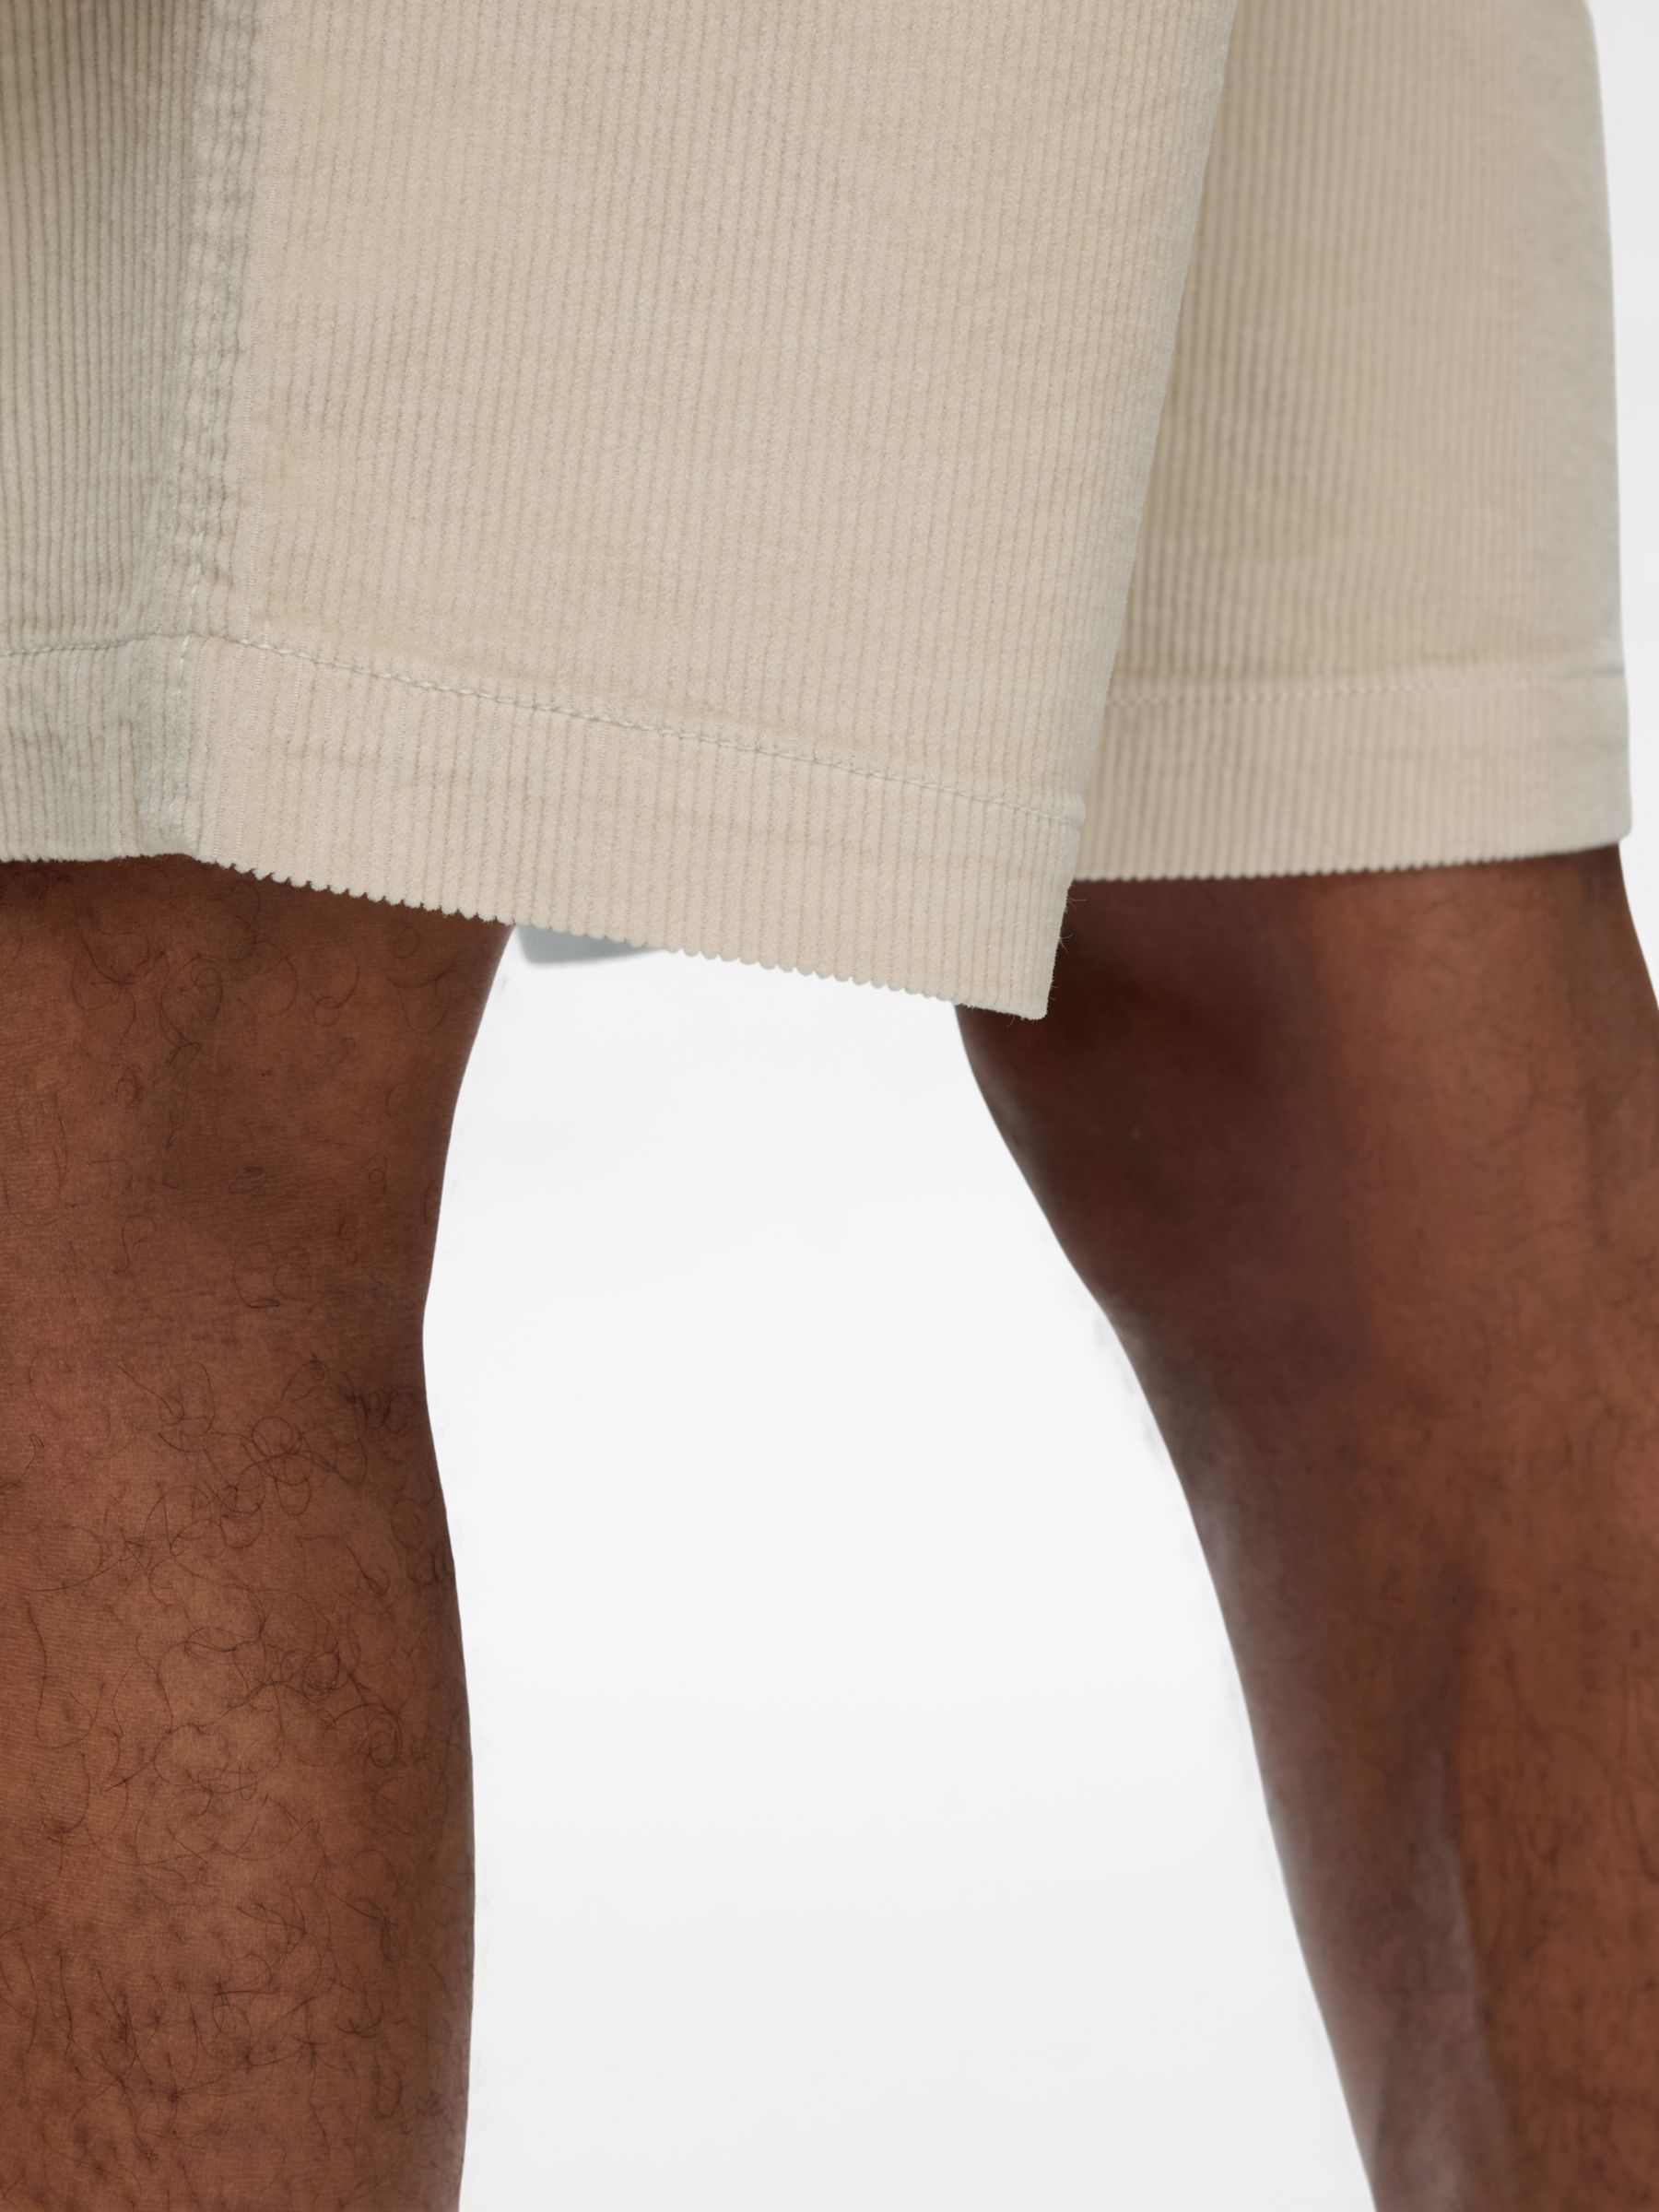 SELECTED HOMME Corduroy Shorts, Fog, S